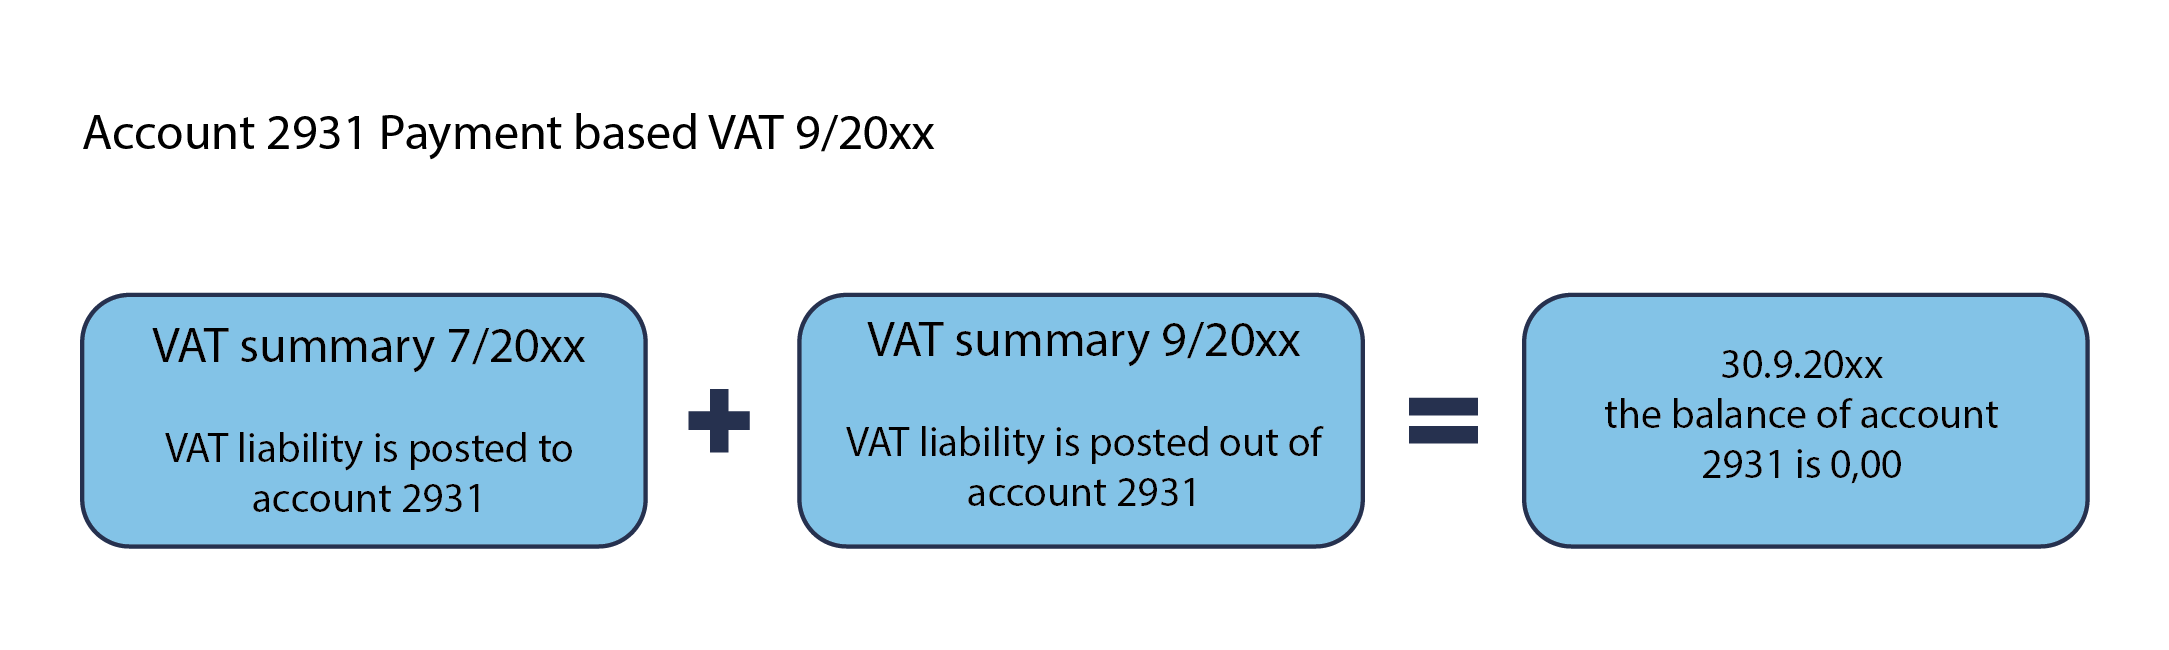 Payment_based_VAT_-_Functionality_example_12.png